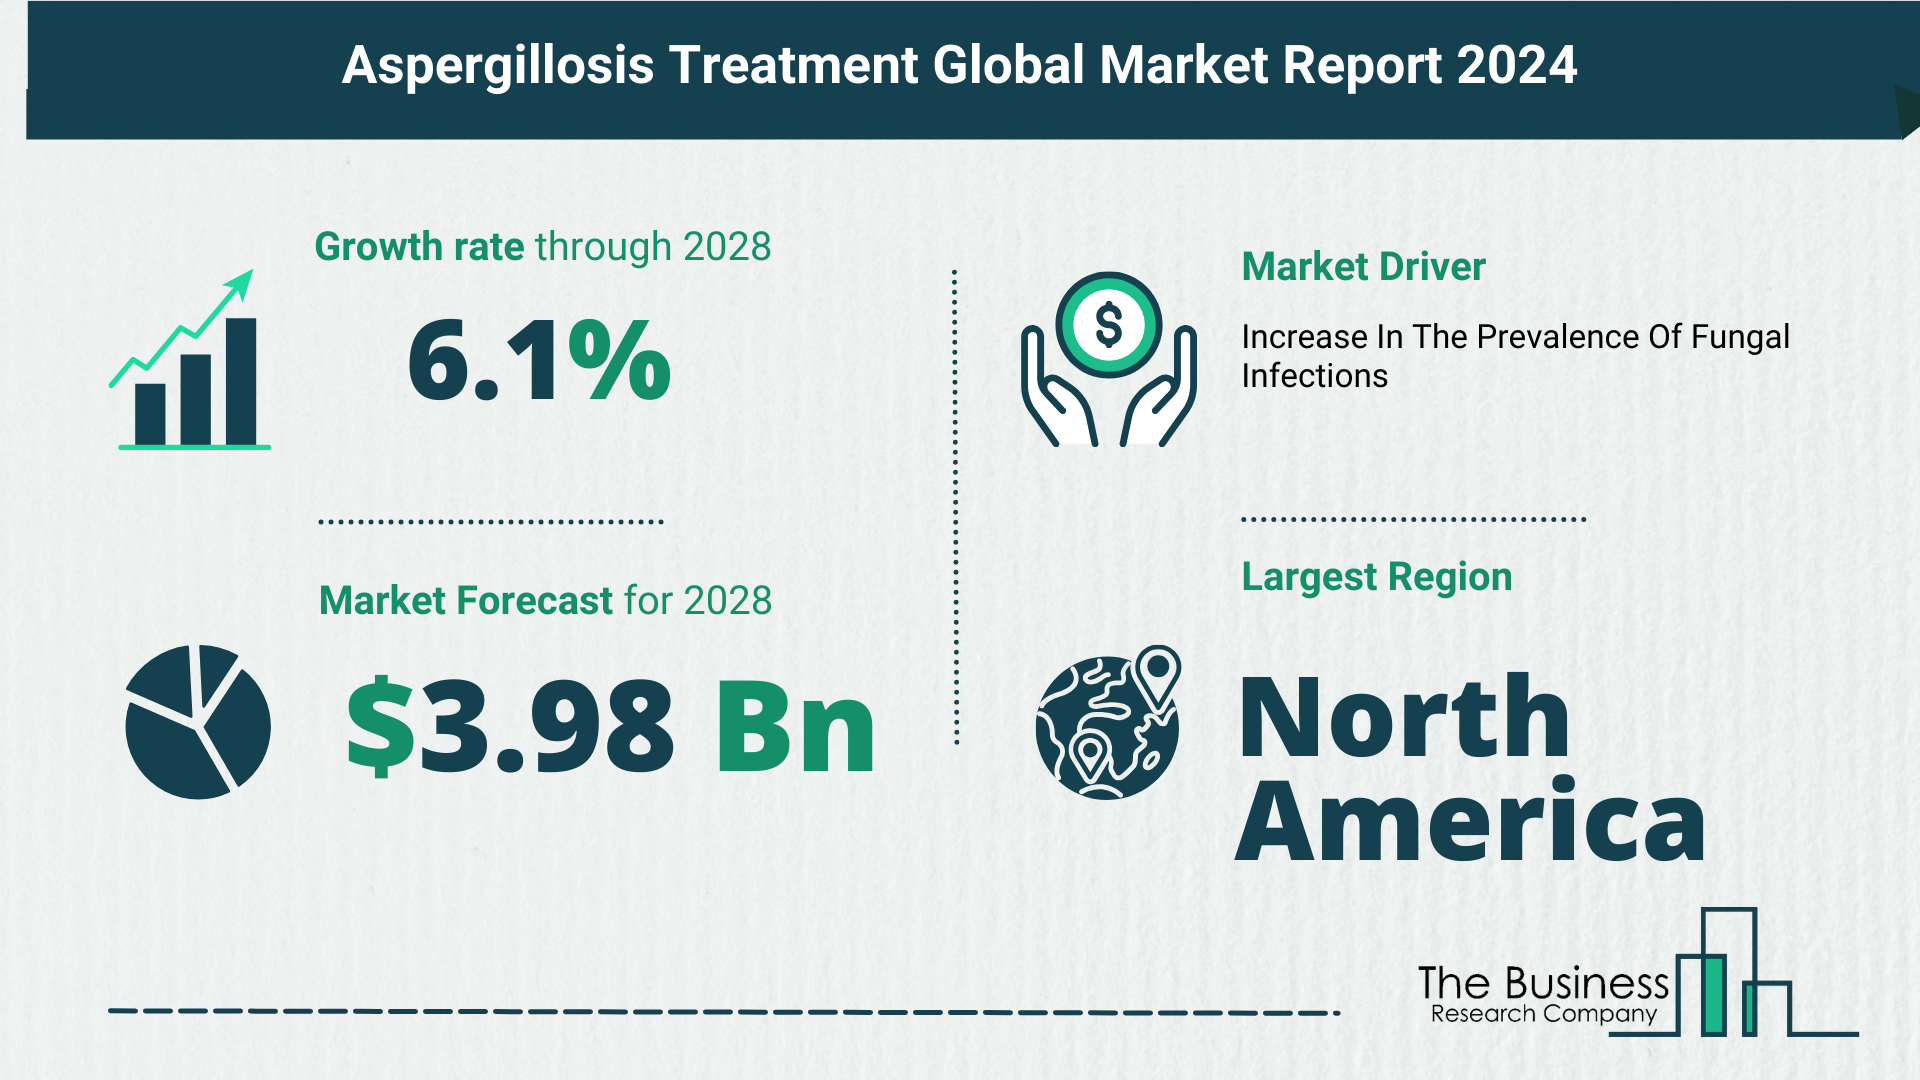 Key Insights On The Aspergillosis Treatment Market 2024 – Size, Driver, And Major Players